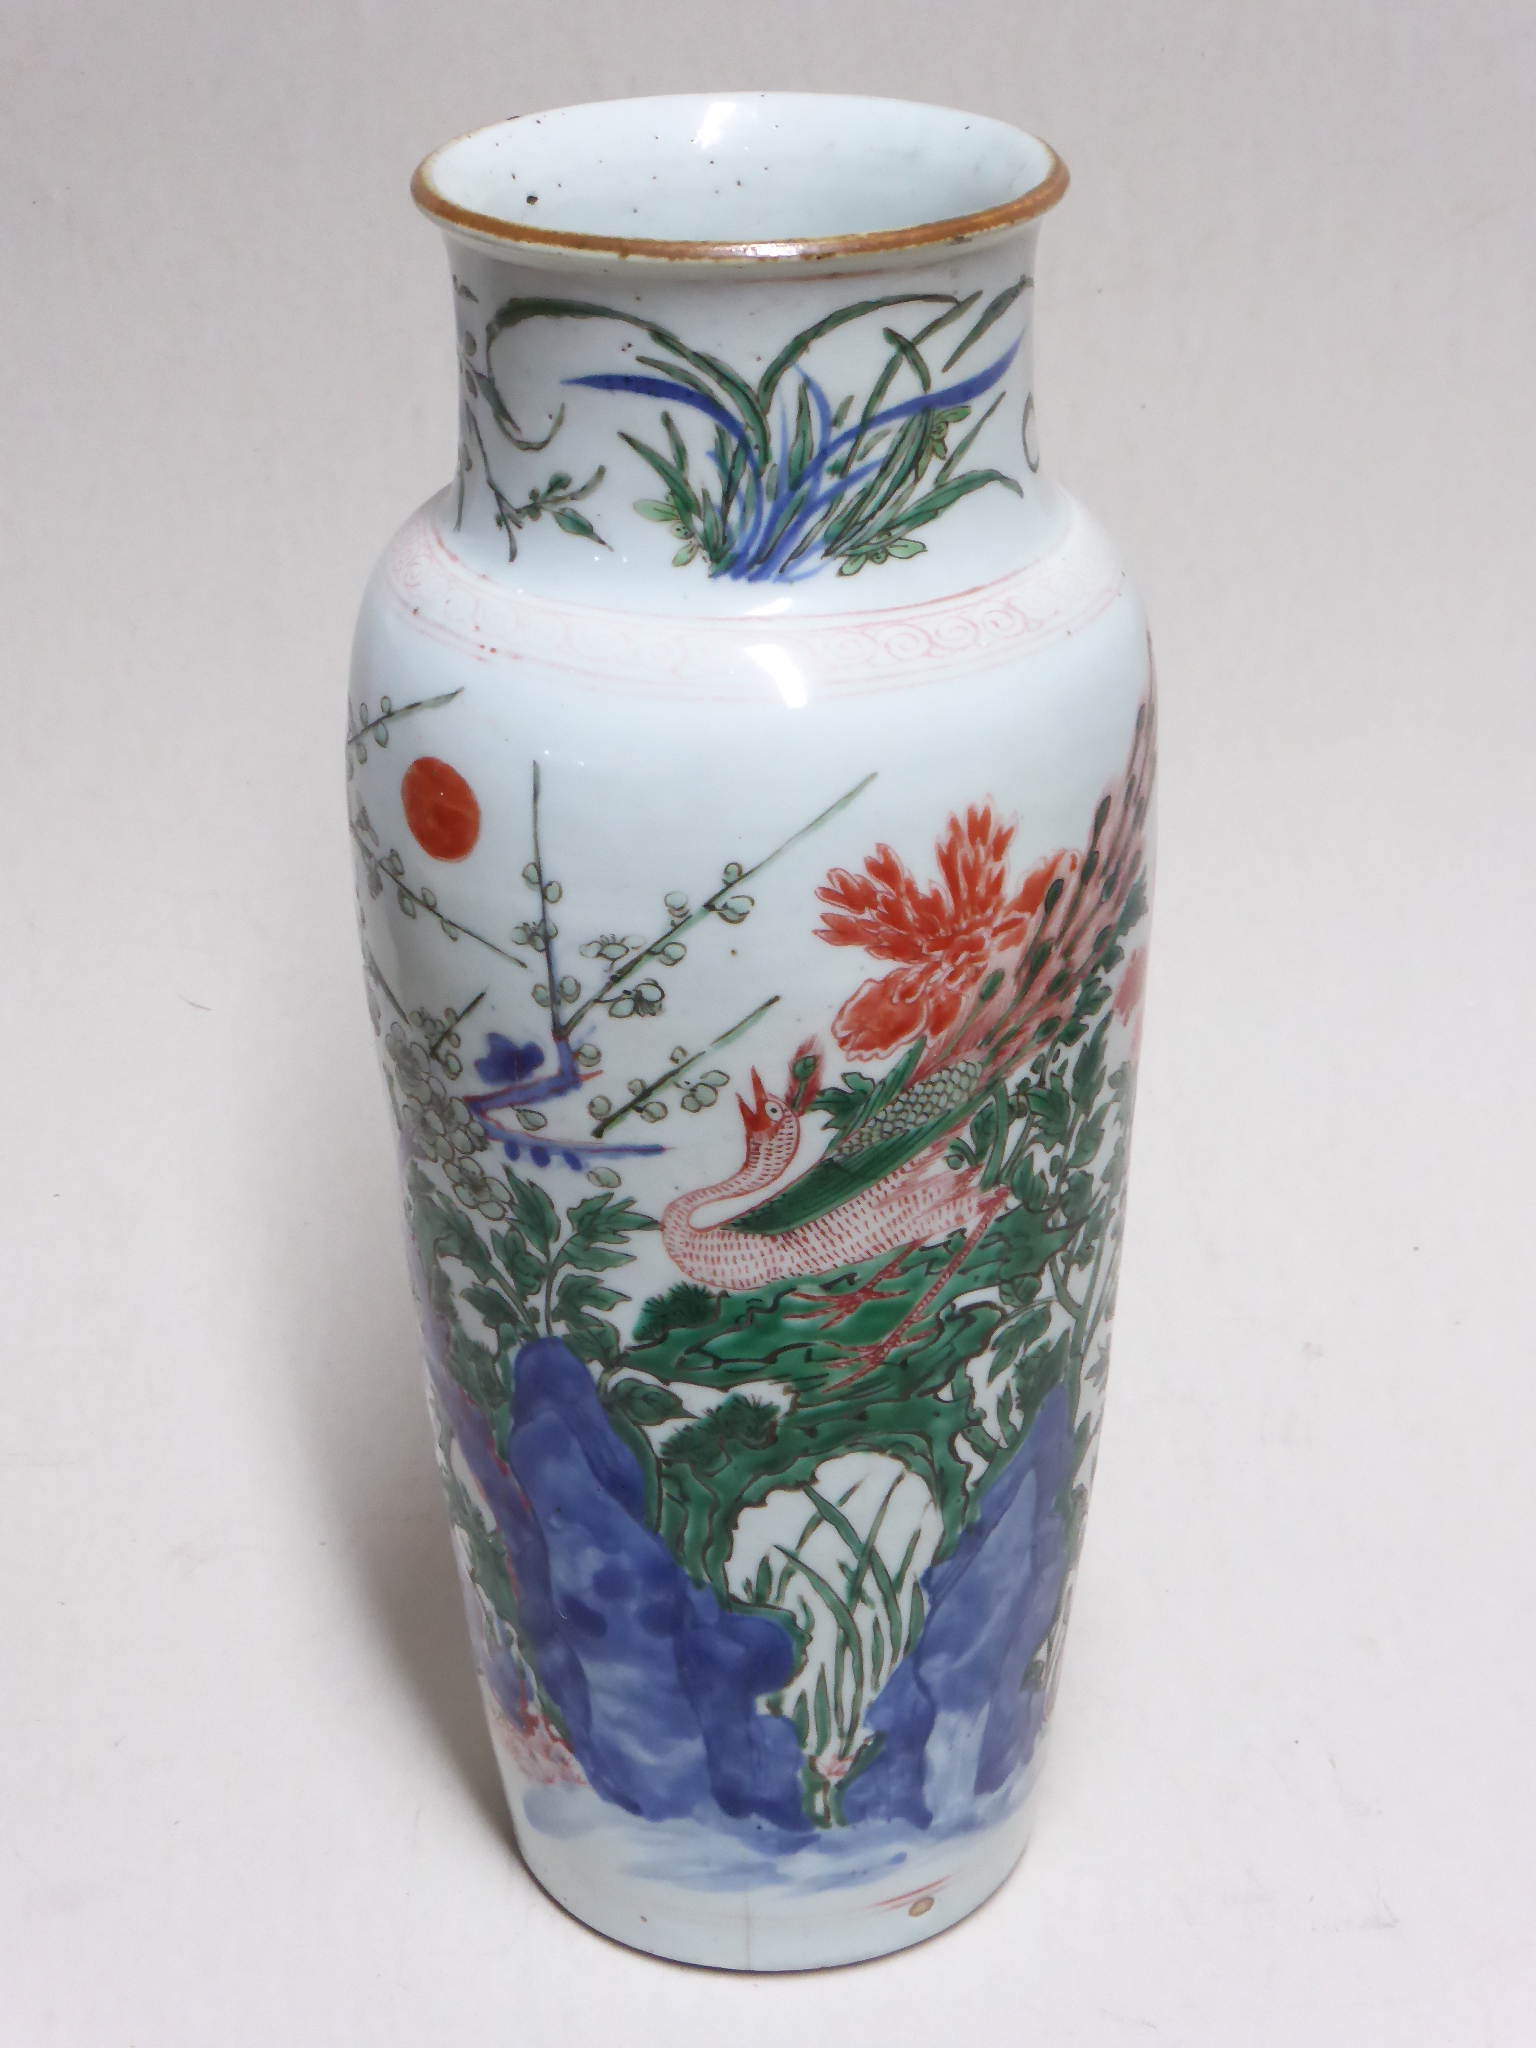 Vase Sold at Auction